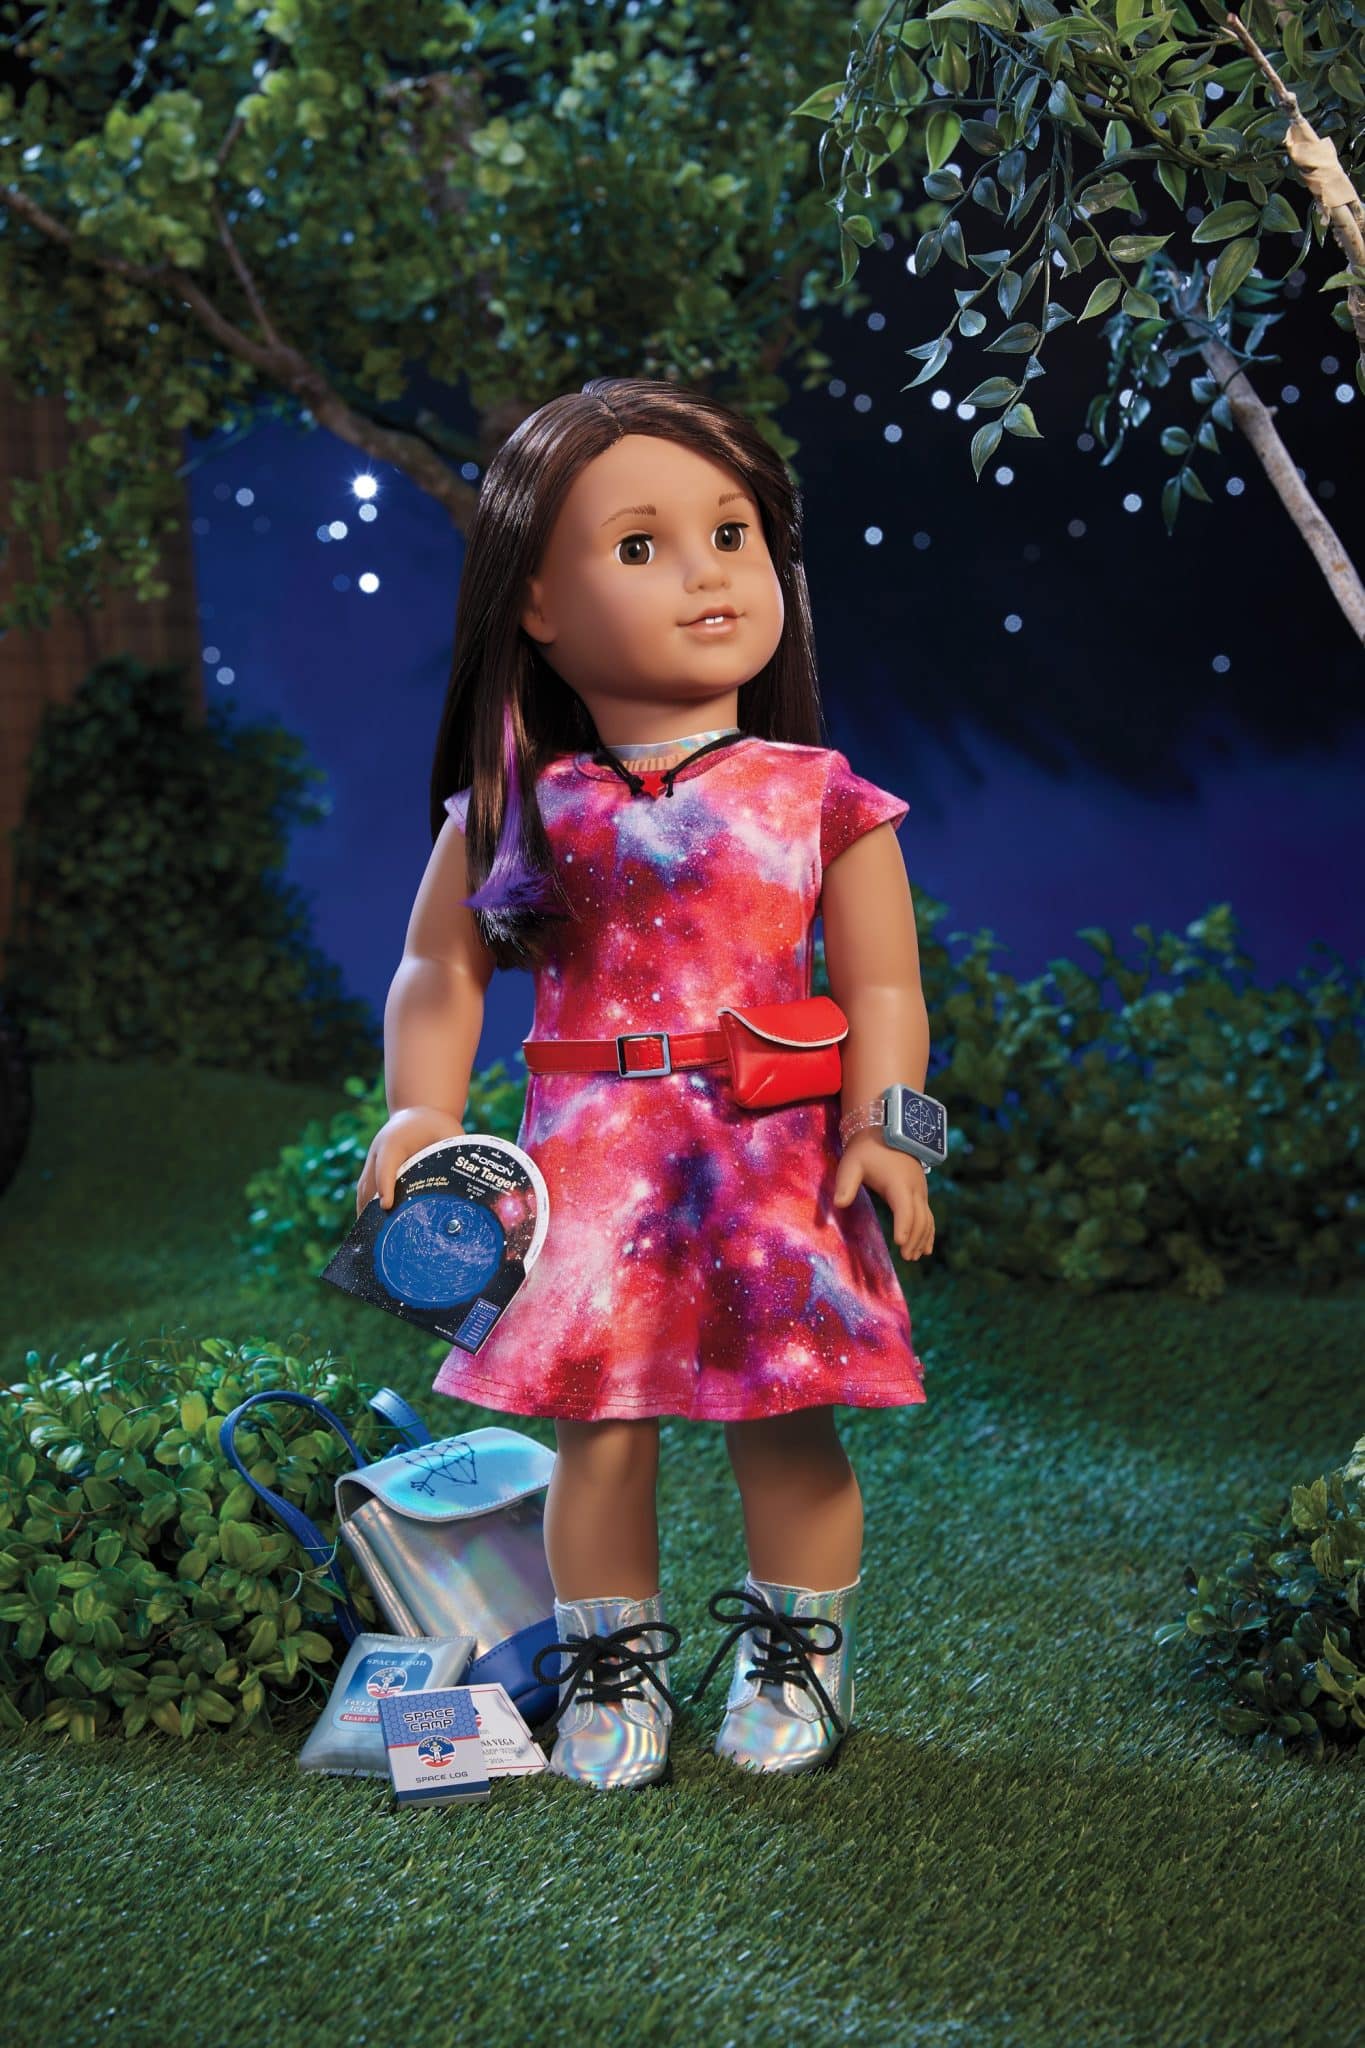 Details about   American Girl Doll Luciana's Flight Camp Outfit NEW! 